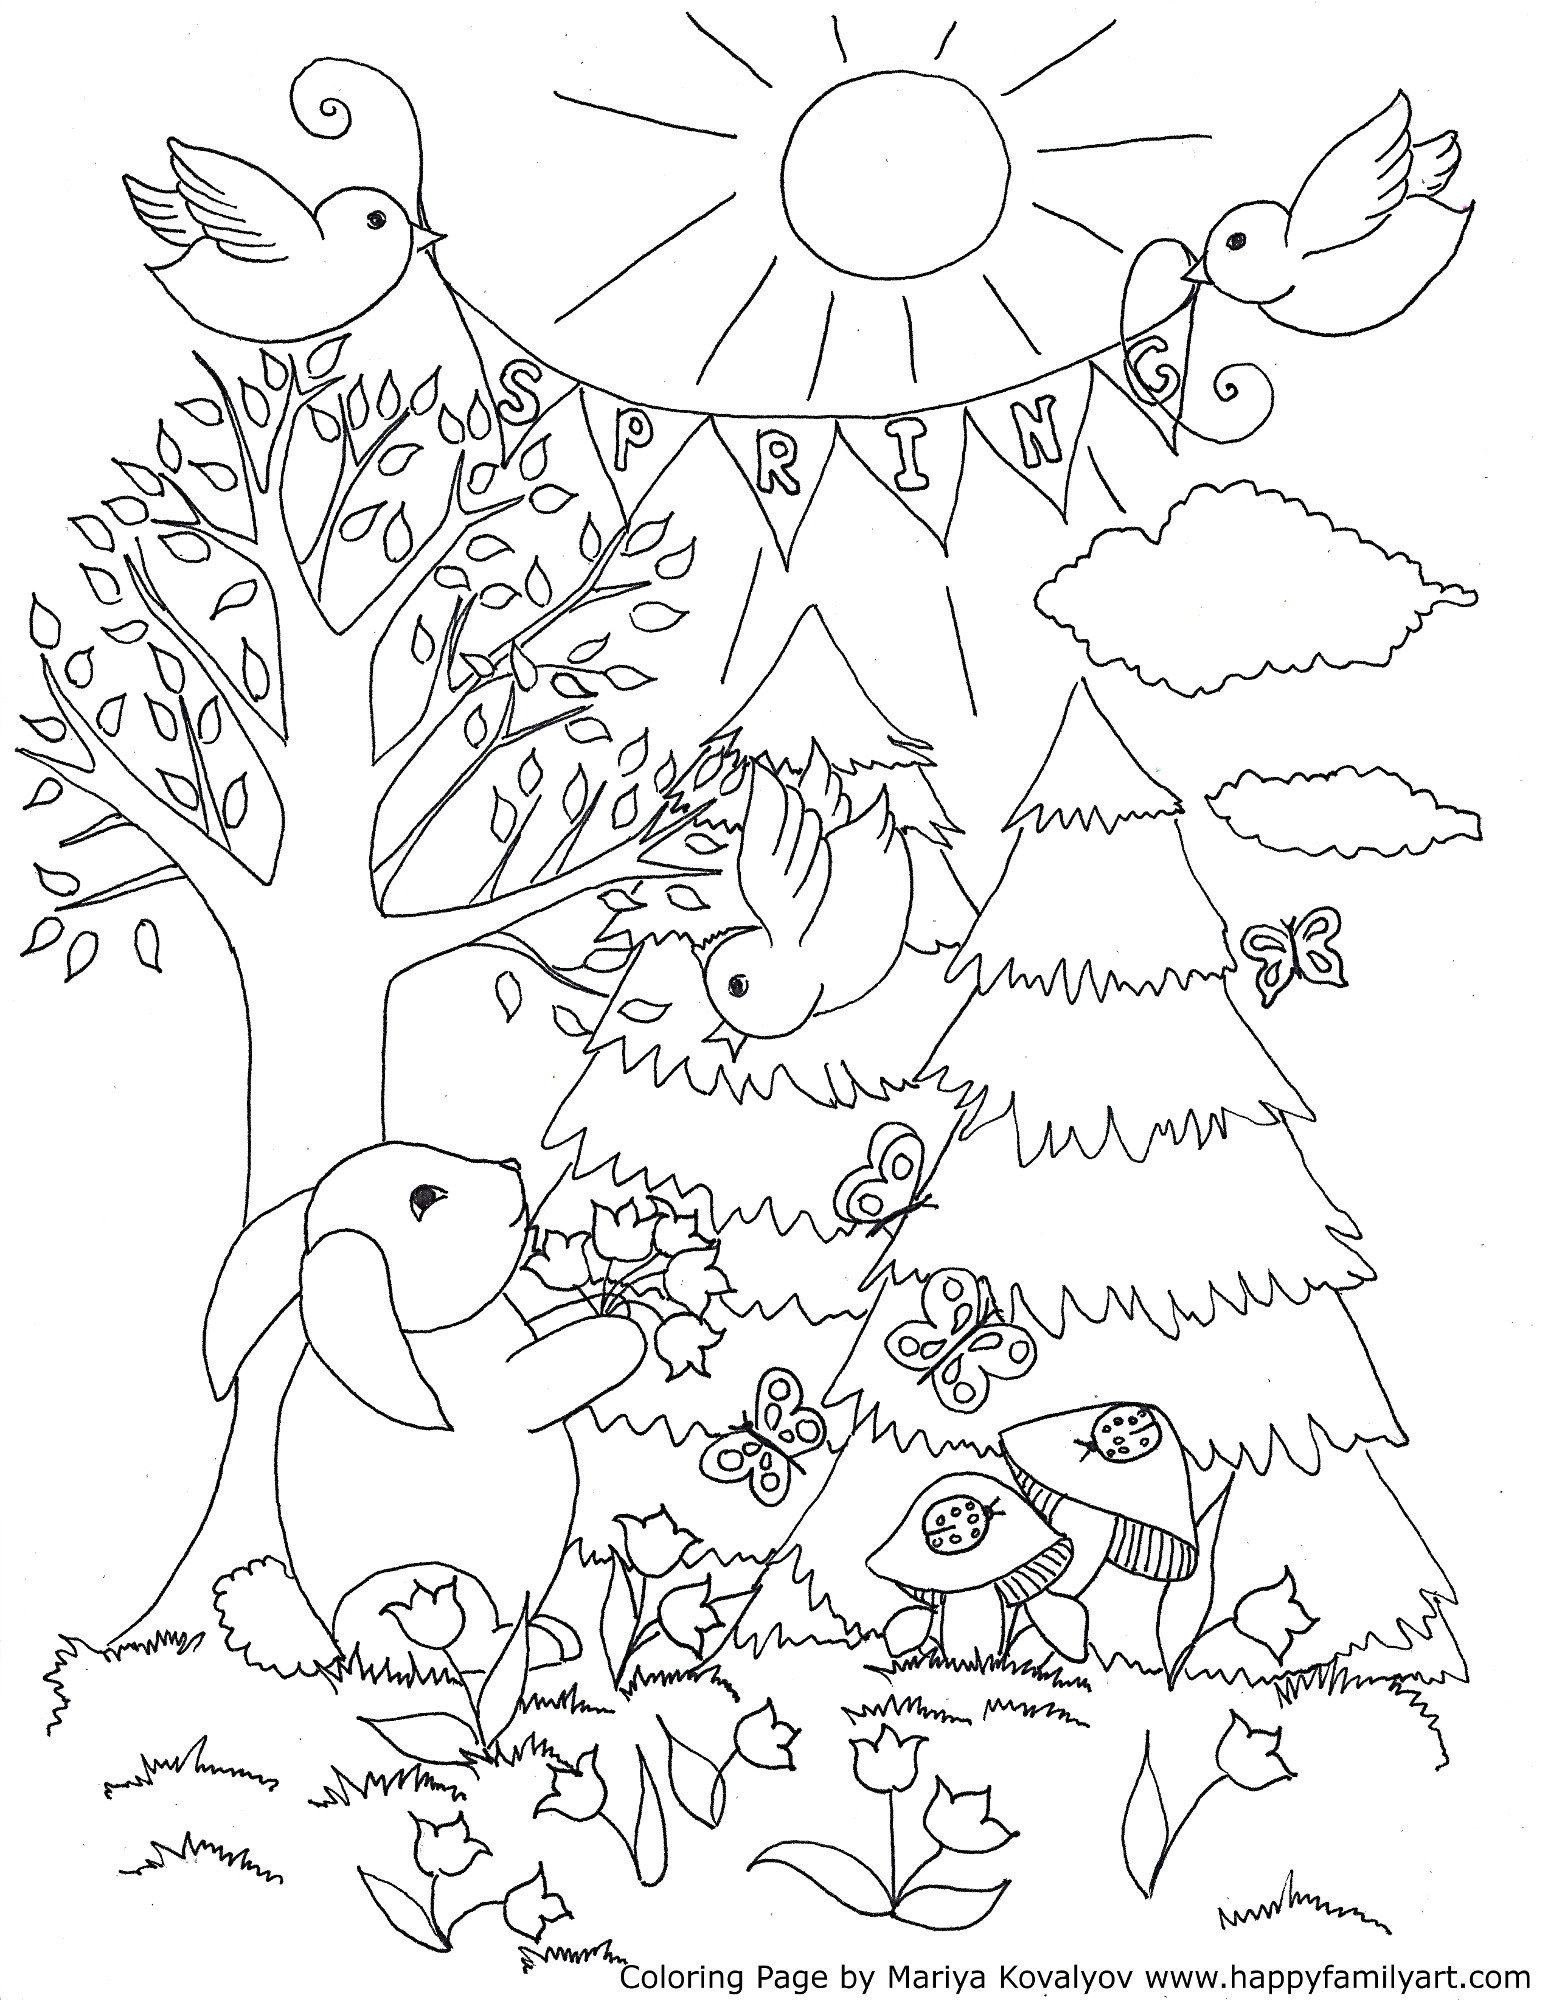 Happy Family Art   original and fun coloring pages